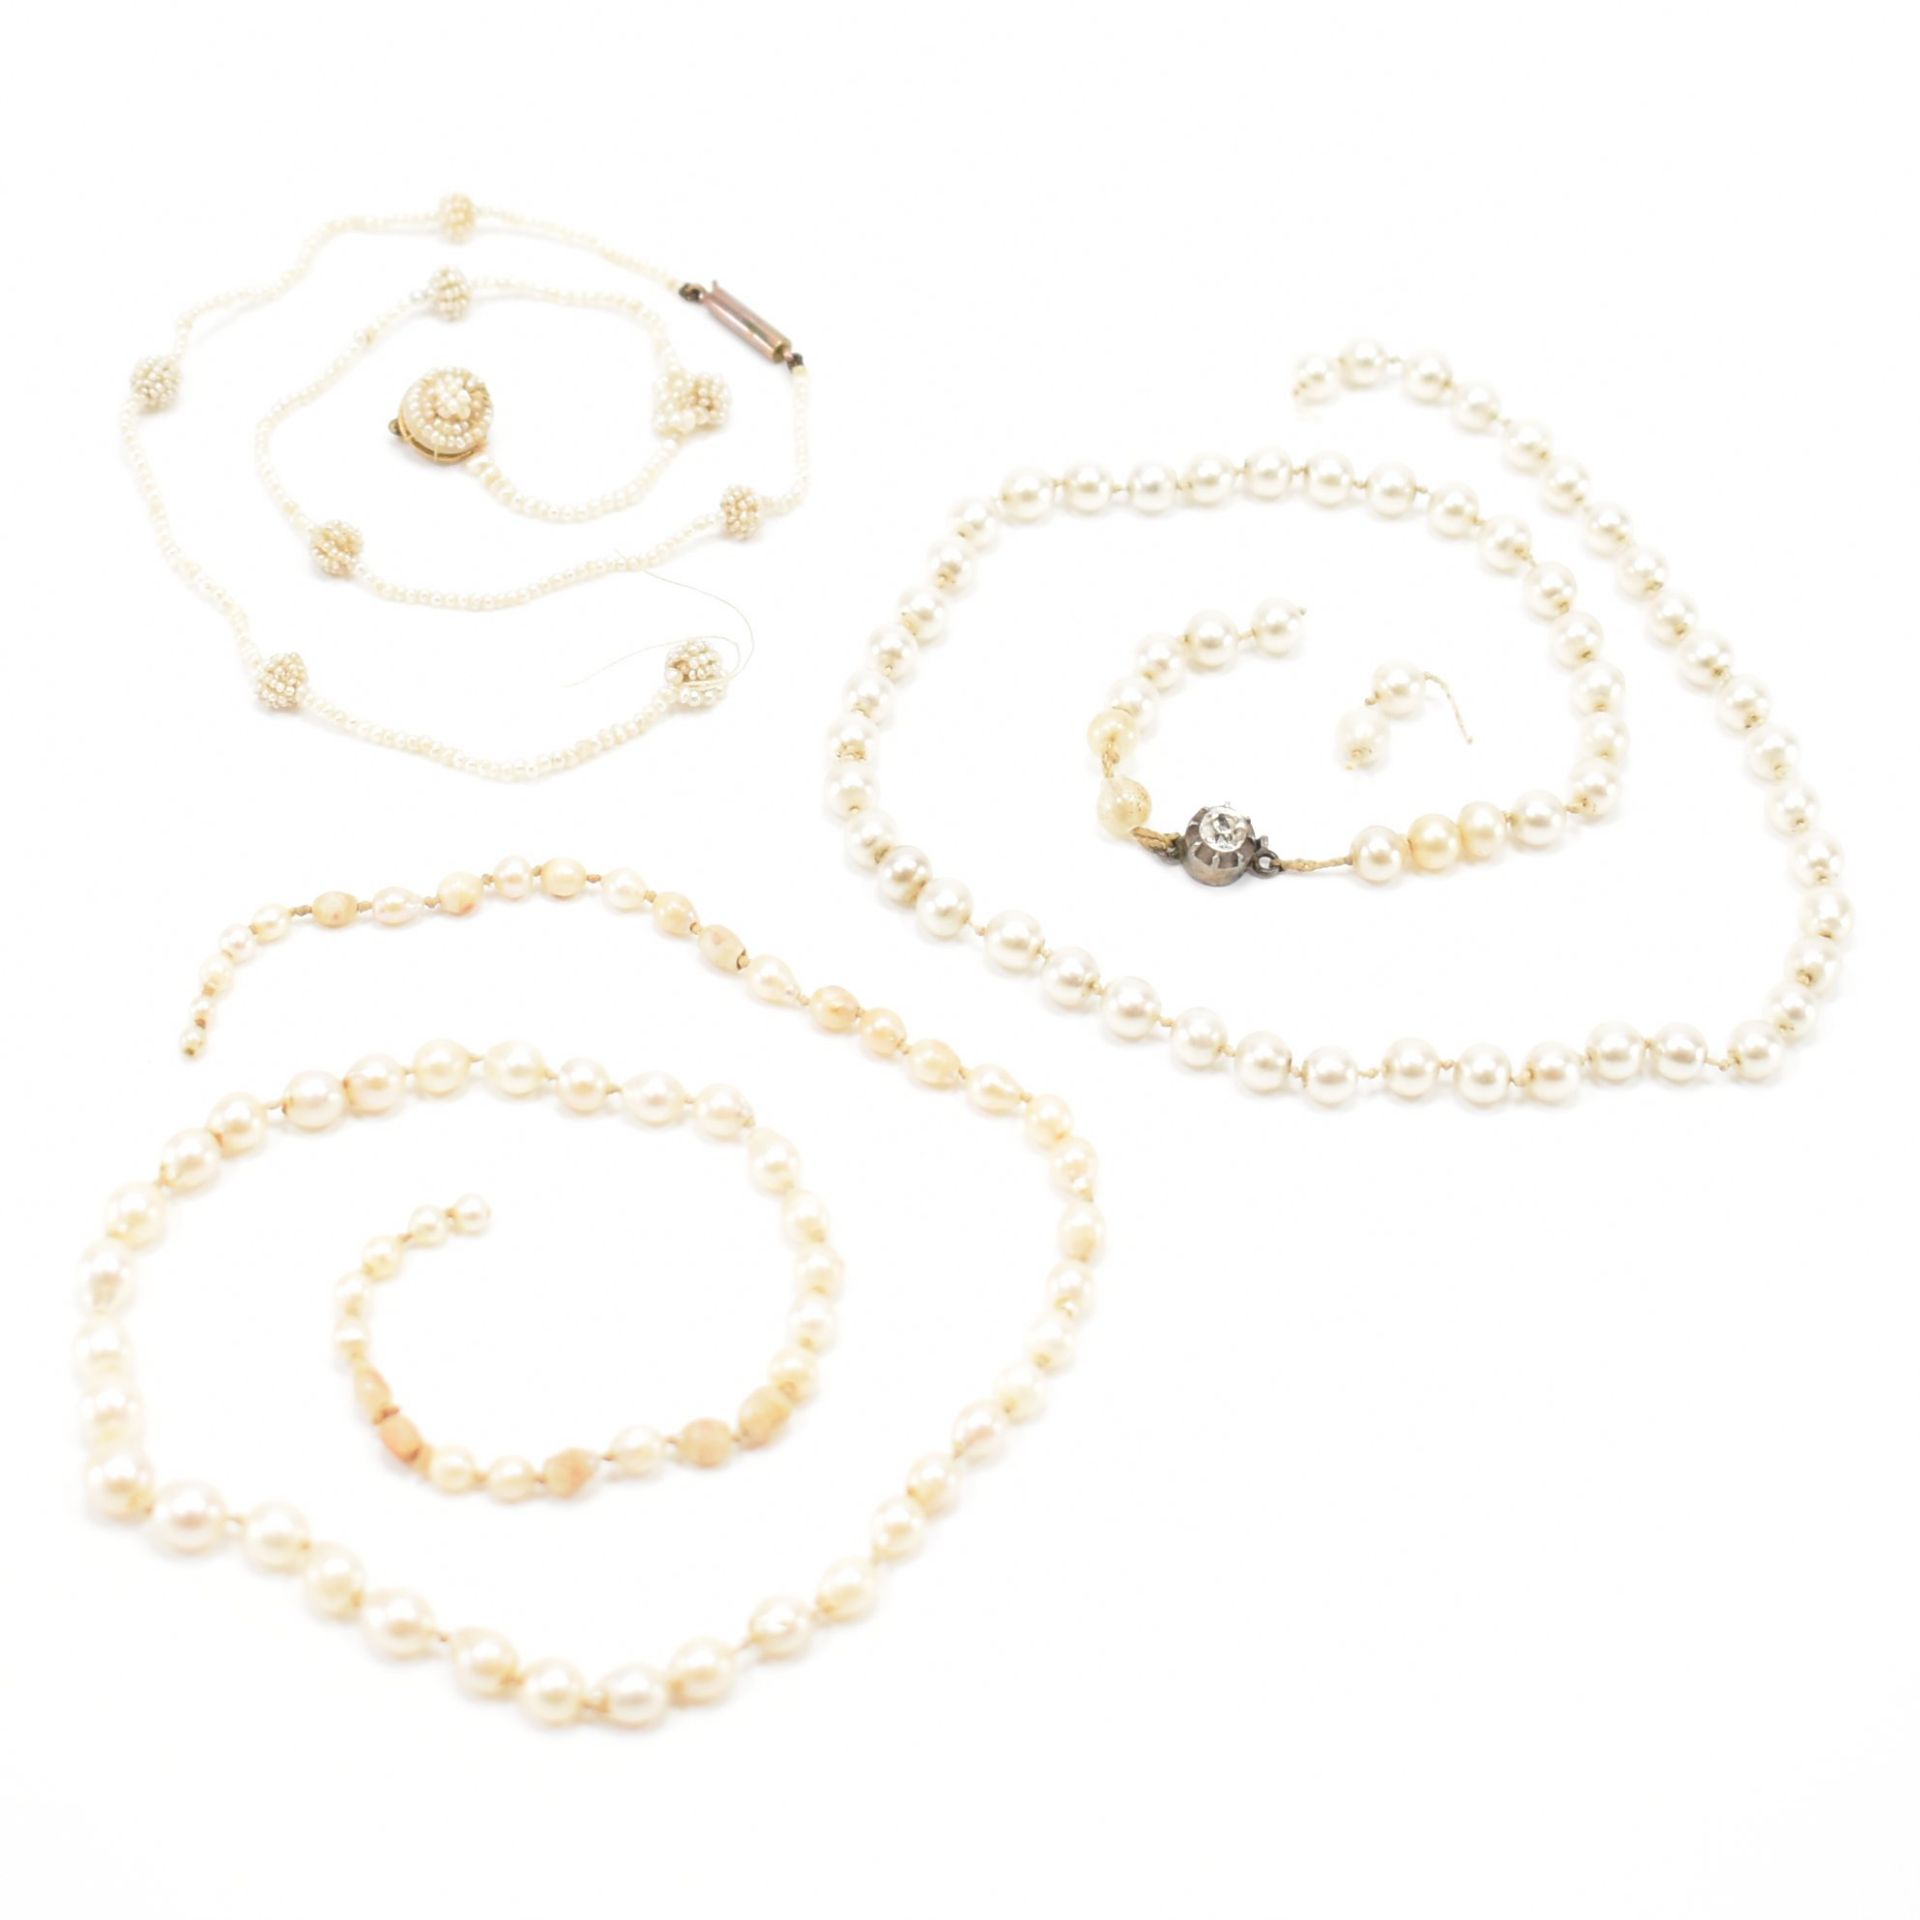 GROUP OF VICTORIAN PEARL NECKLACE FRAGMENTS